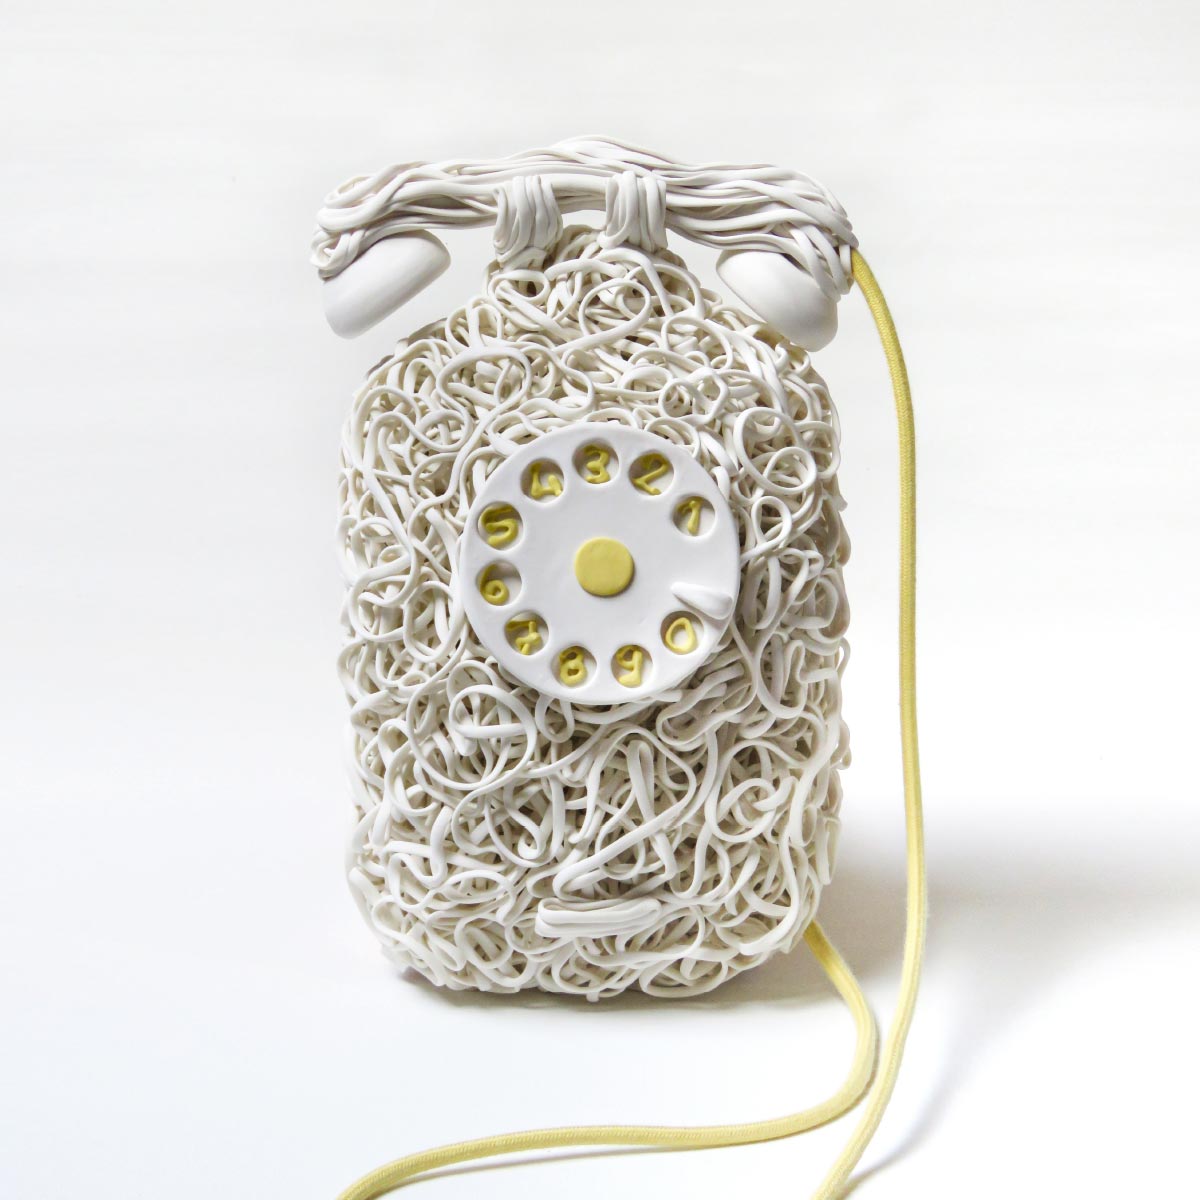 Livia Marasso sculpture telephone with wire porcelain 2